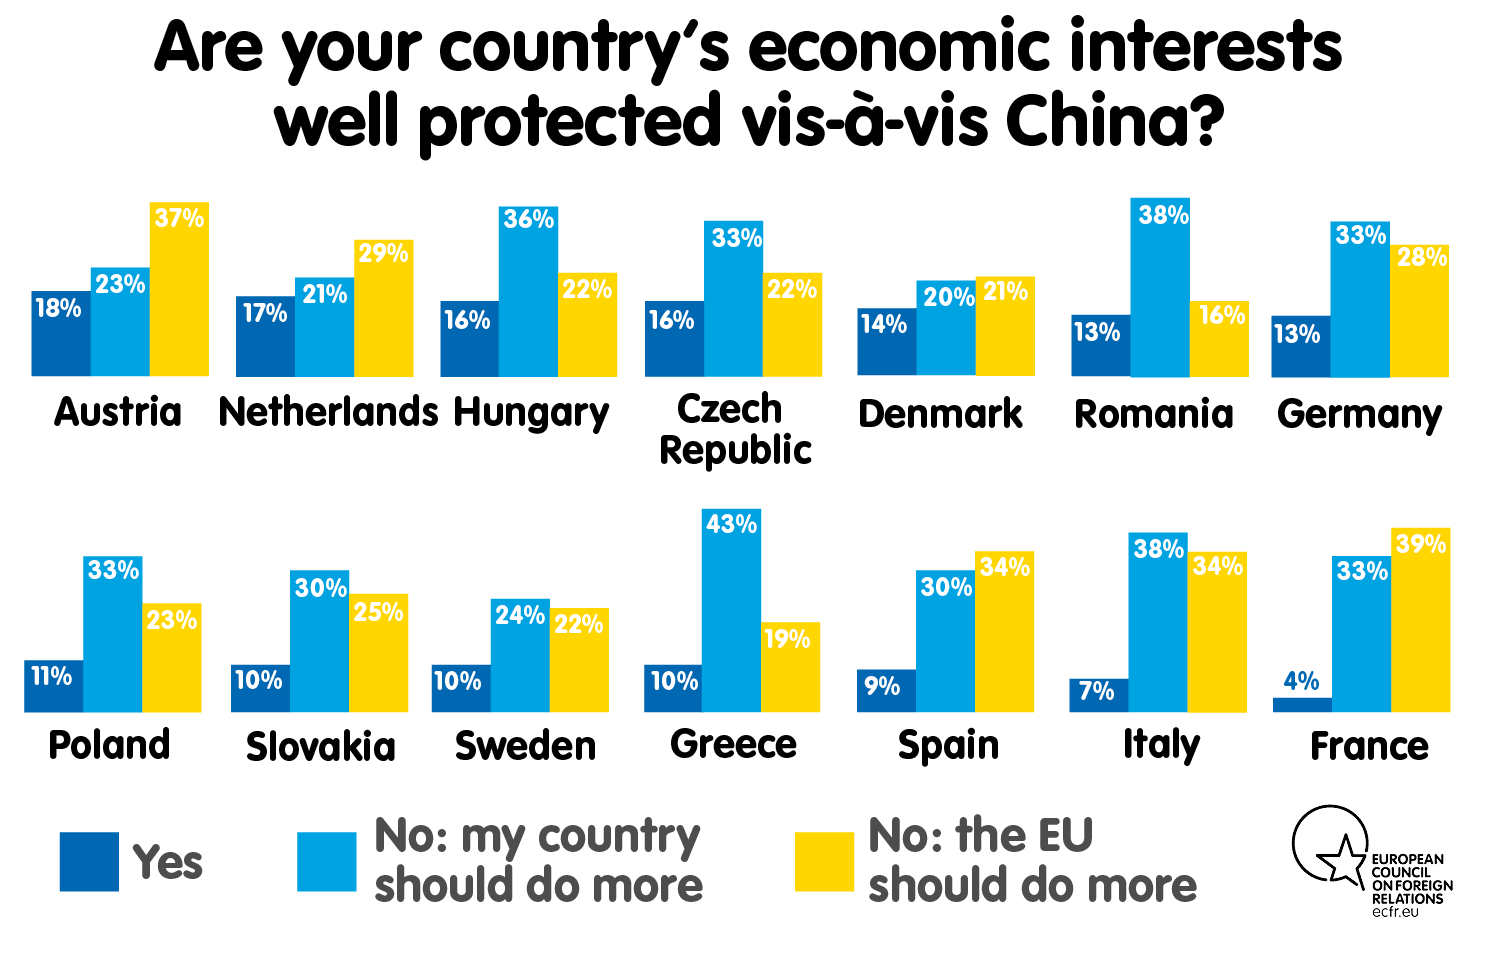 Are your country's economic interests well protected vis-à-vis China?